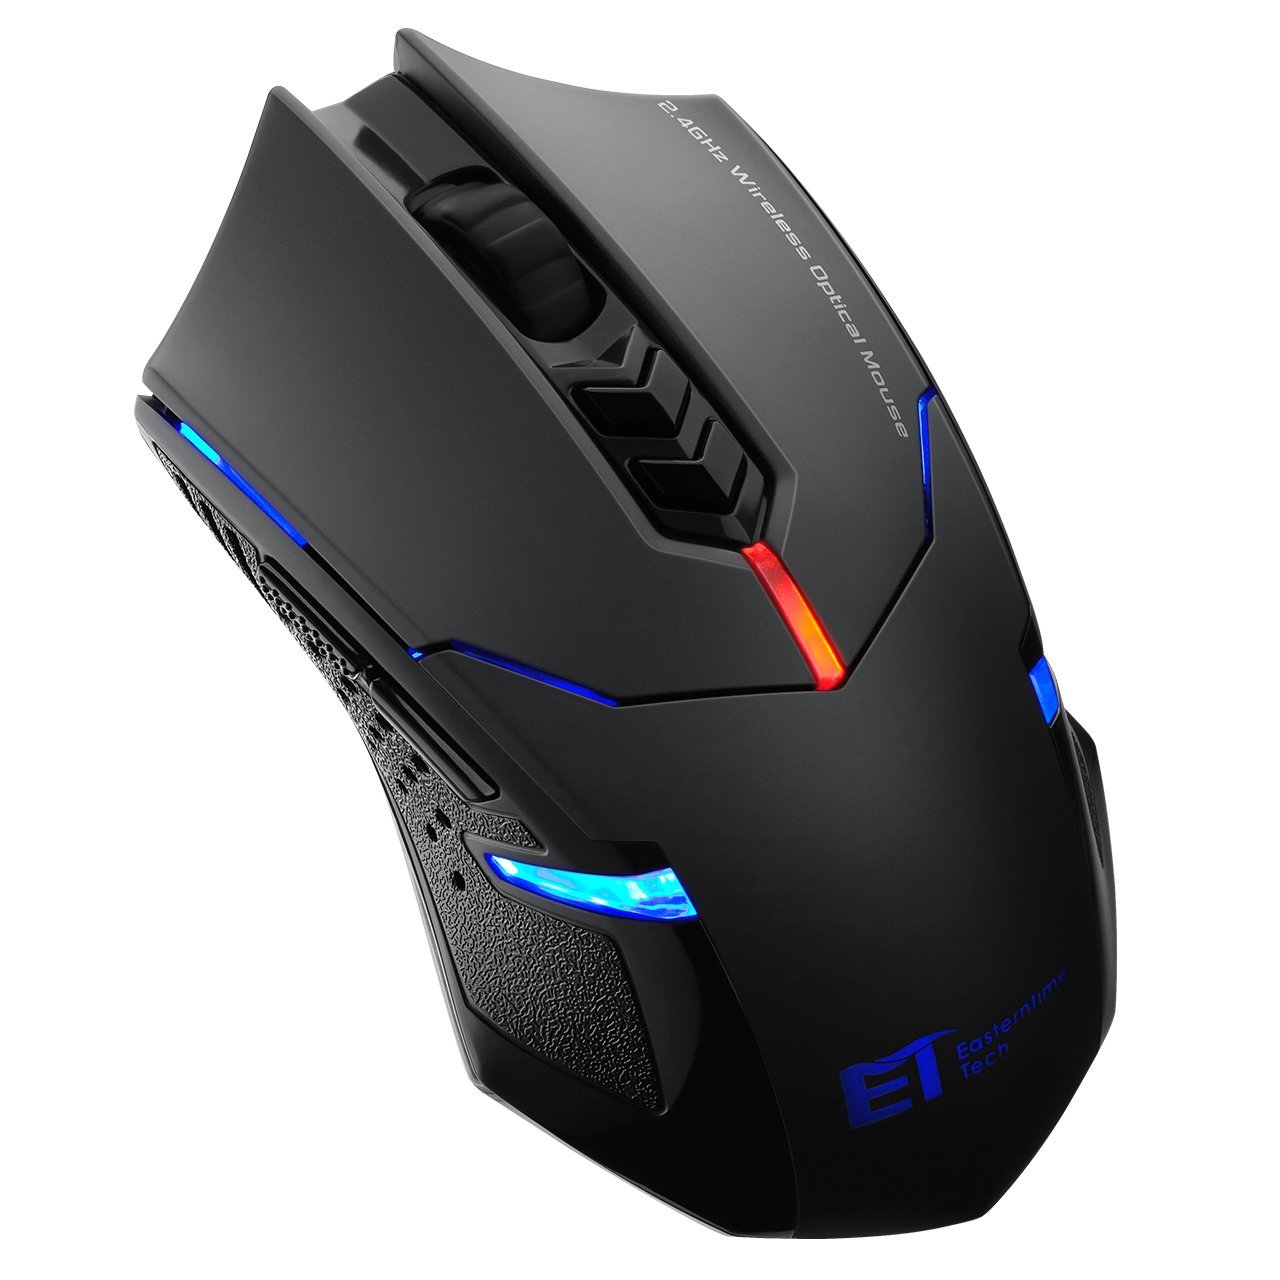 Best Cheap Gaming Mouse To Buy Buyer's Guide and Reviews